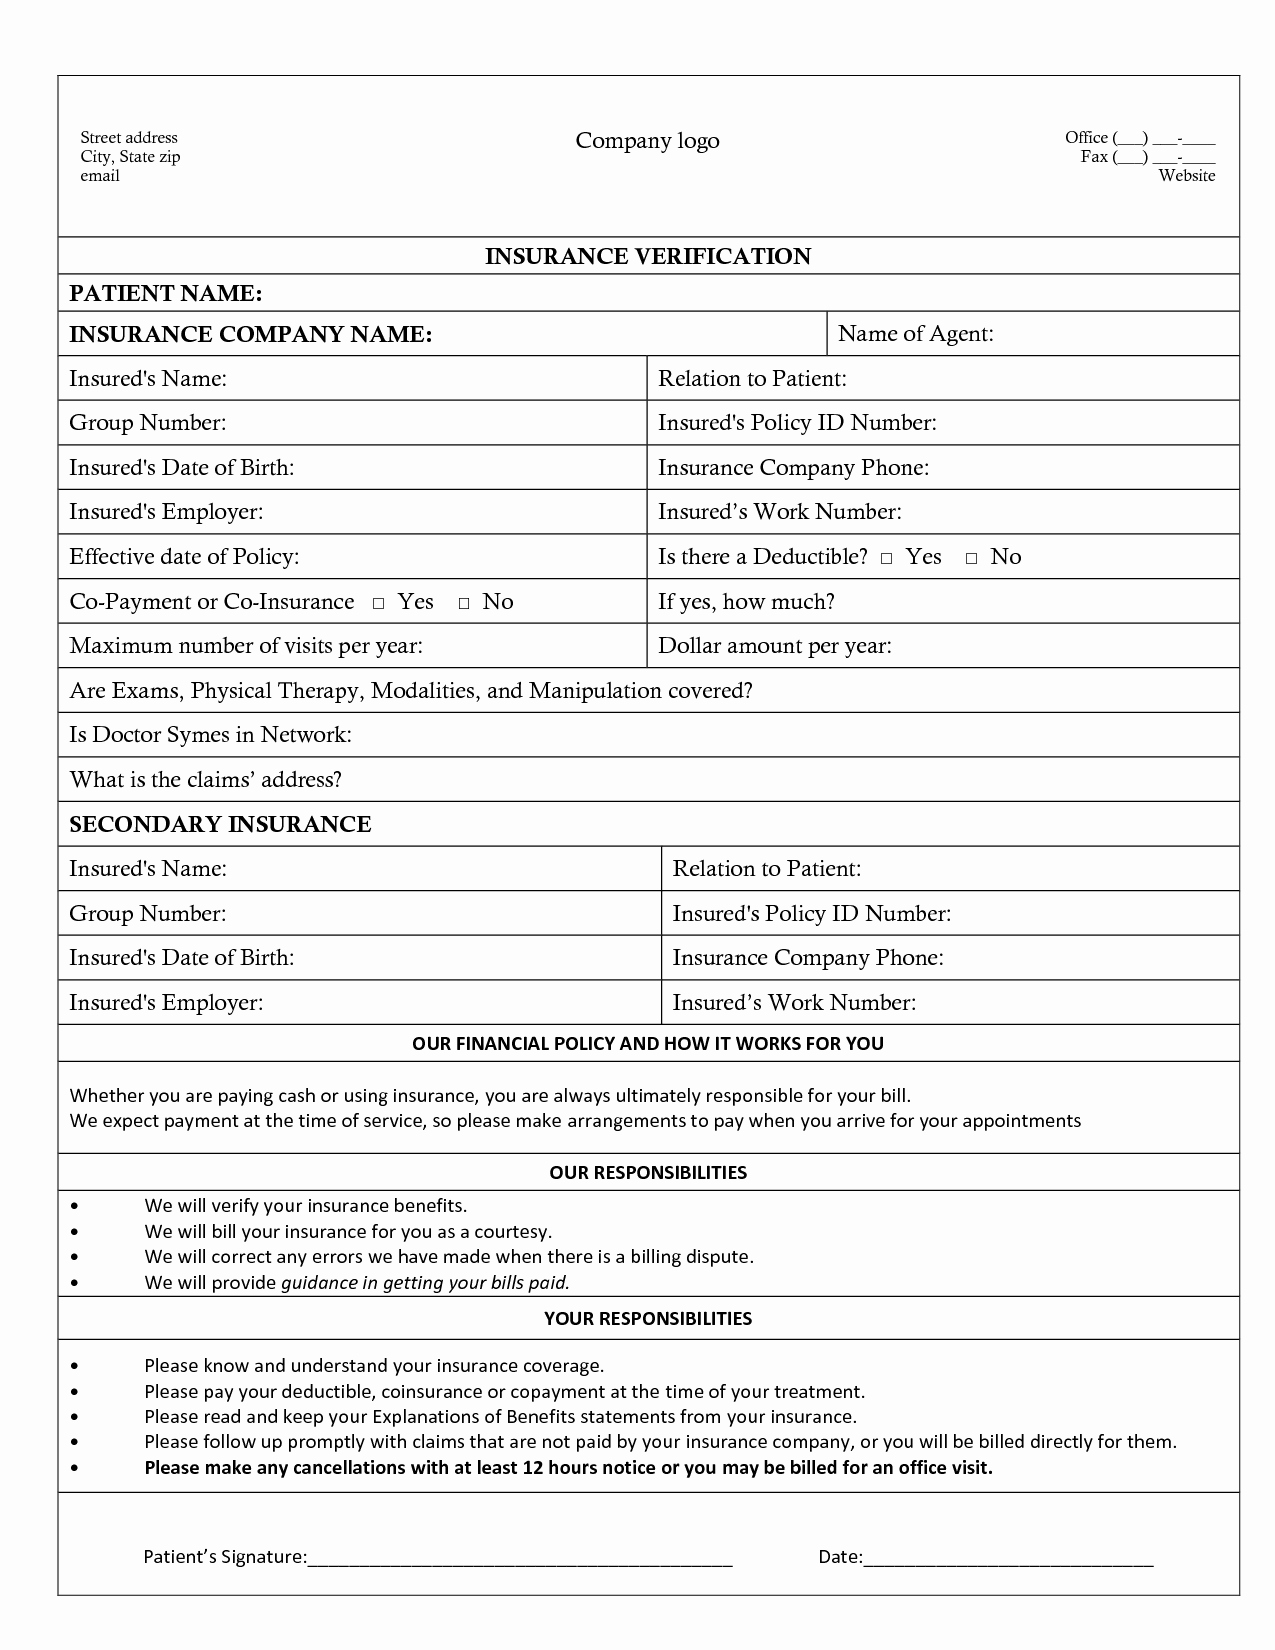 Proof Of Insurance Template Lovely Medical Insurance Verification form Template – Templates